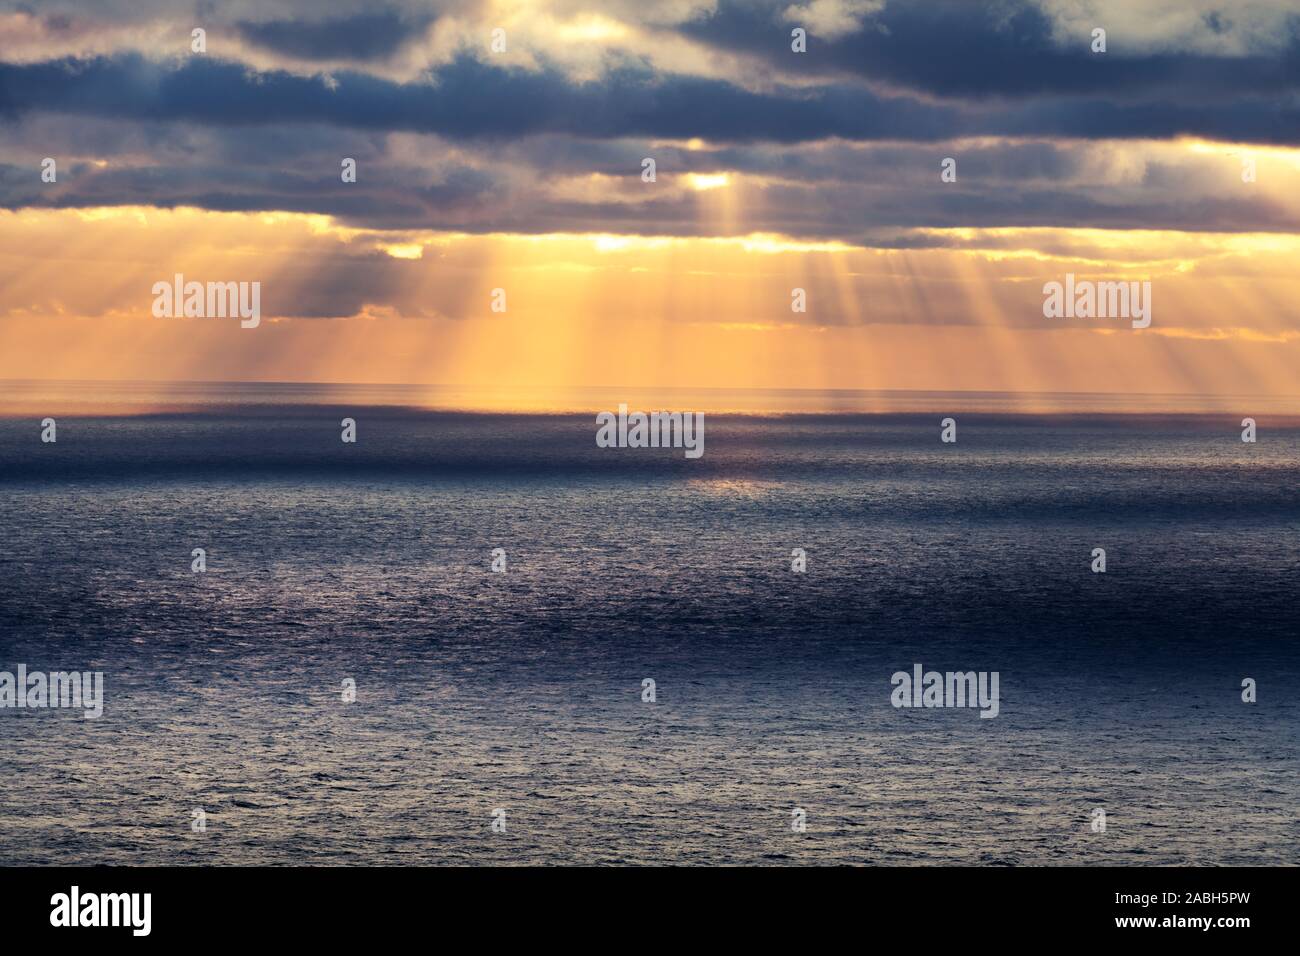 Sunset in the ocean with glowing sun rays and cloudy sky. Sea sunrise background. Landscape photography Stock Photo